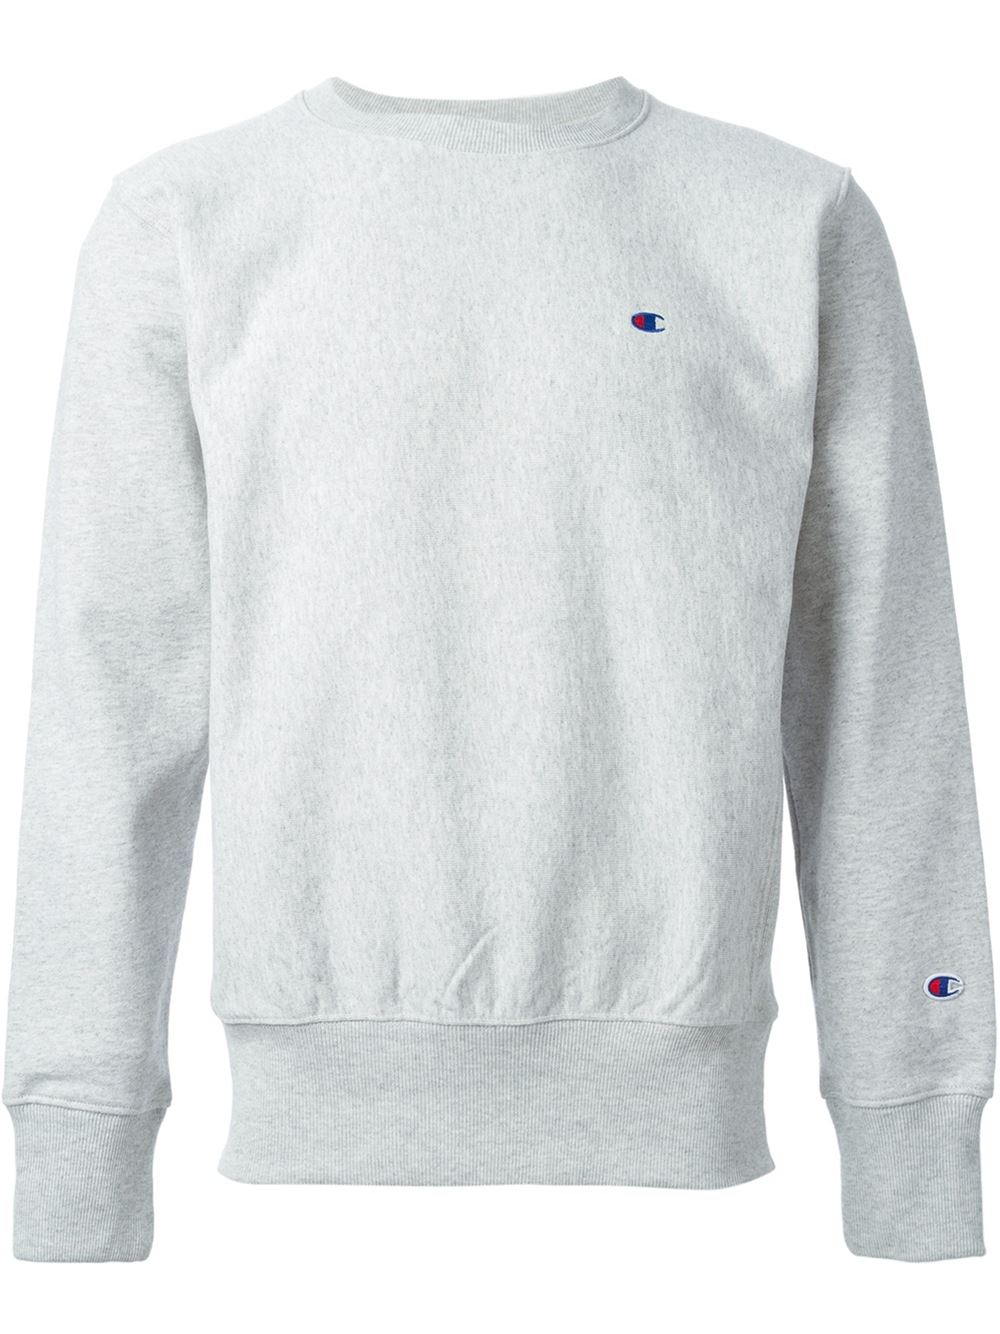 Lyst - Champion Logo Embroidered Sweatshirt in Gray for Men